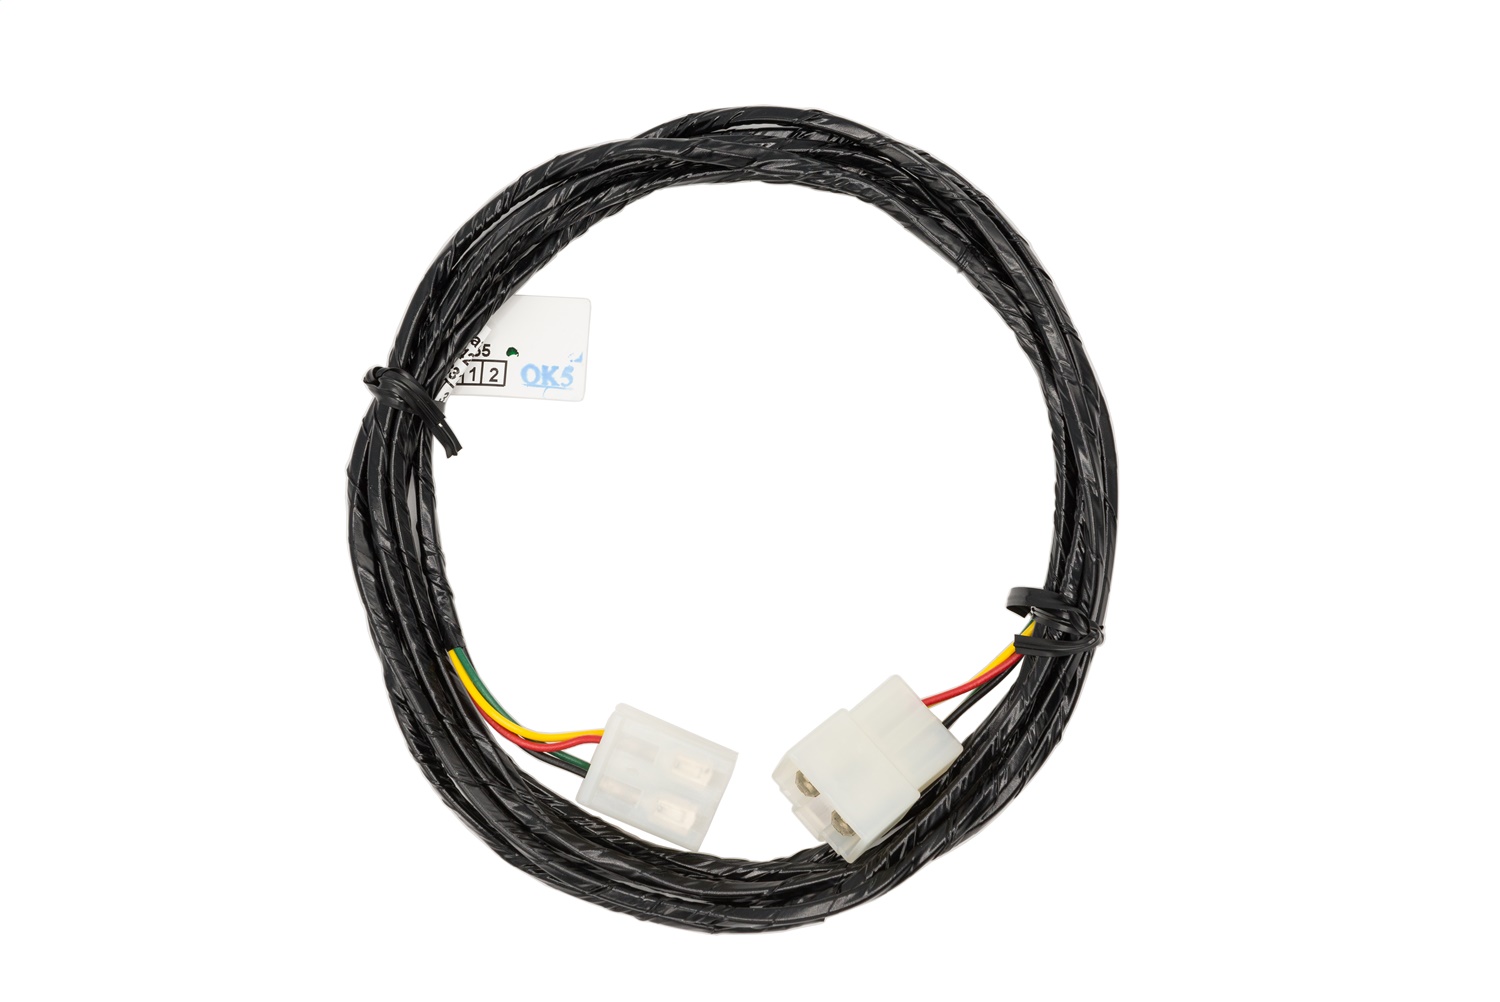 ARB Wiring Harness Extension; For Use with ARB Compressors;